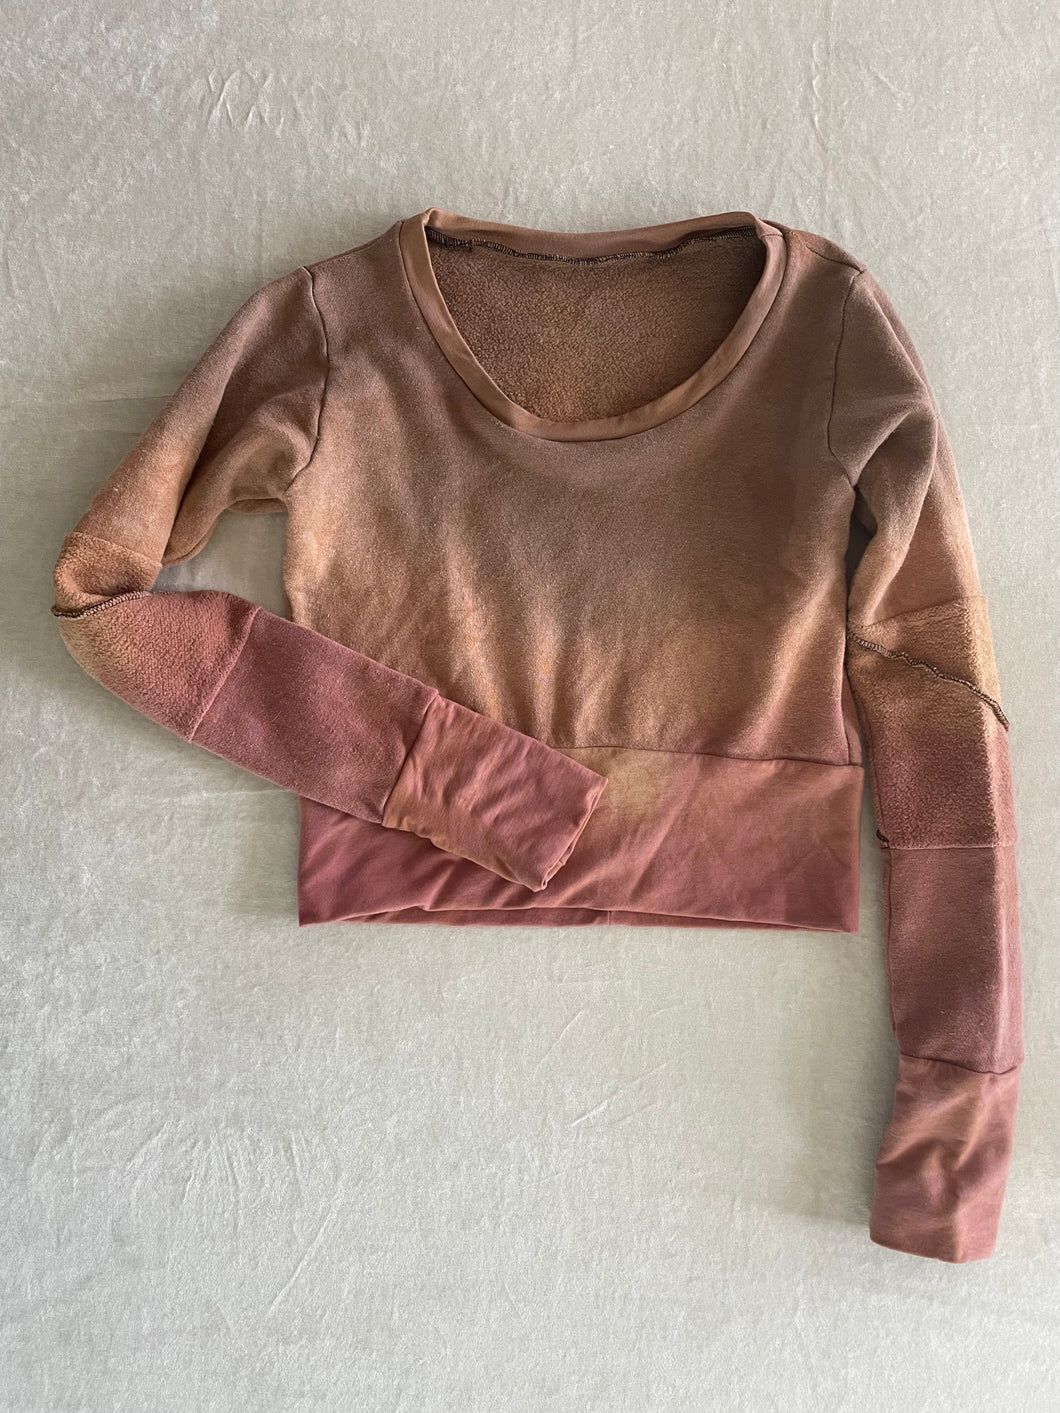 XS/S Second hand ‘viragoes duds’ Pullover